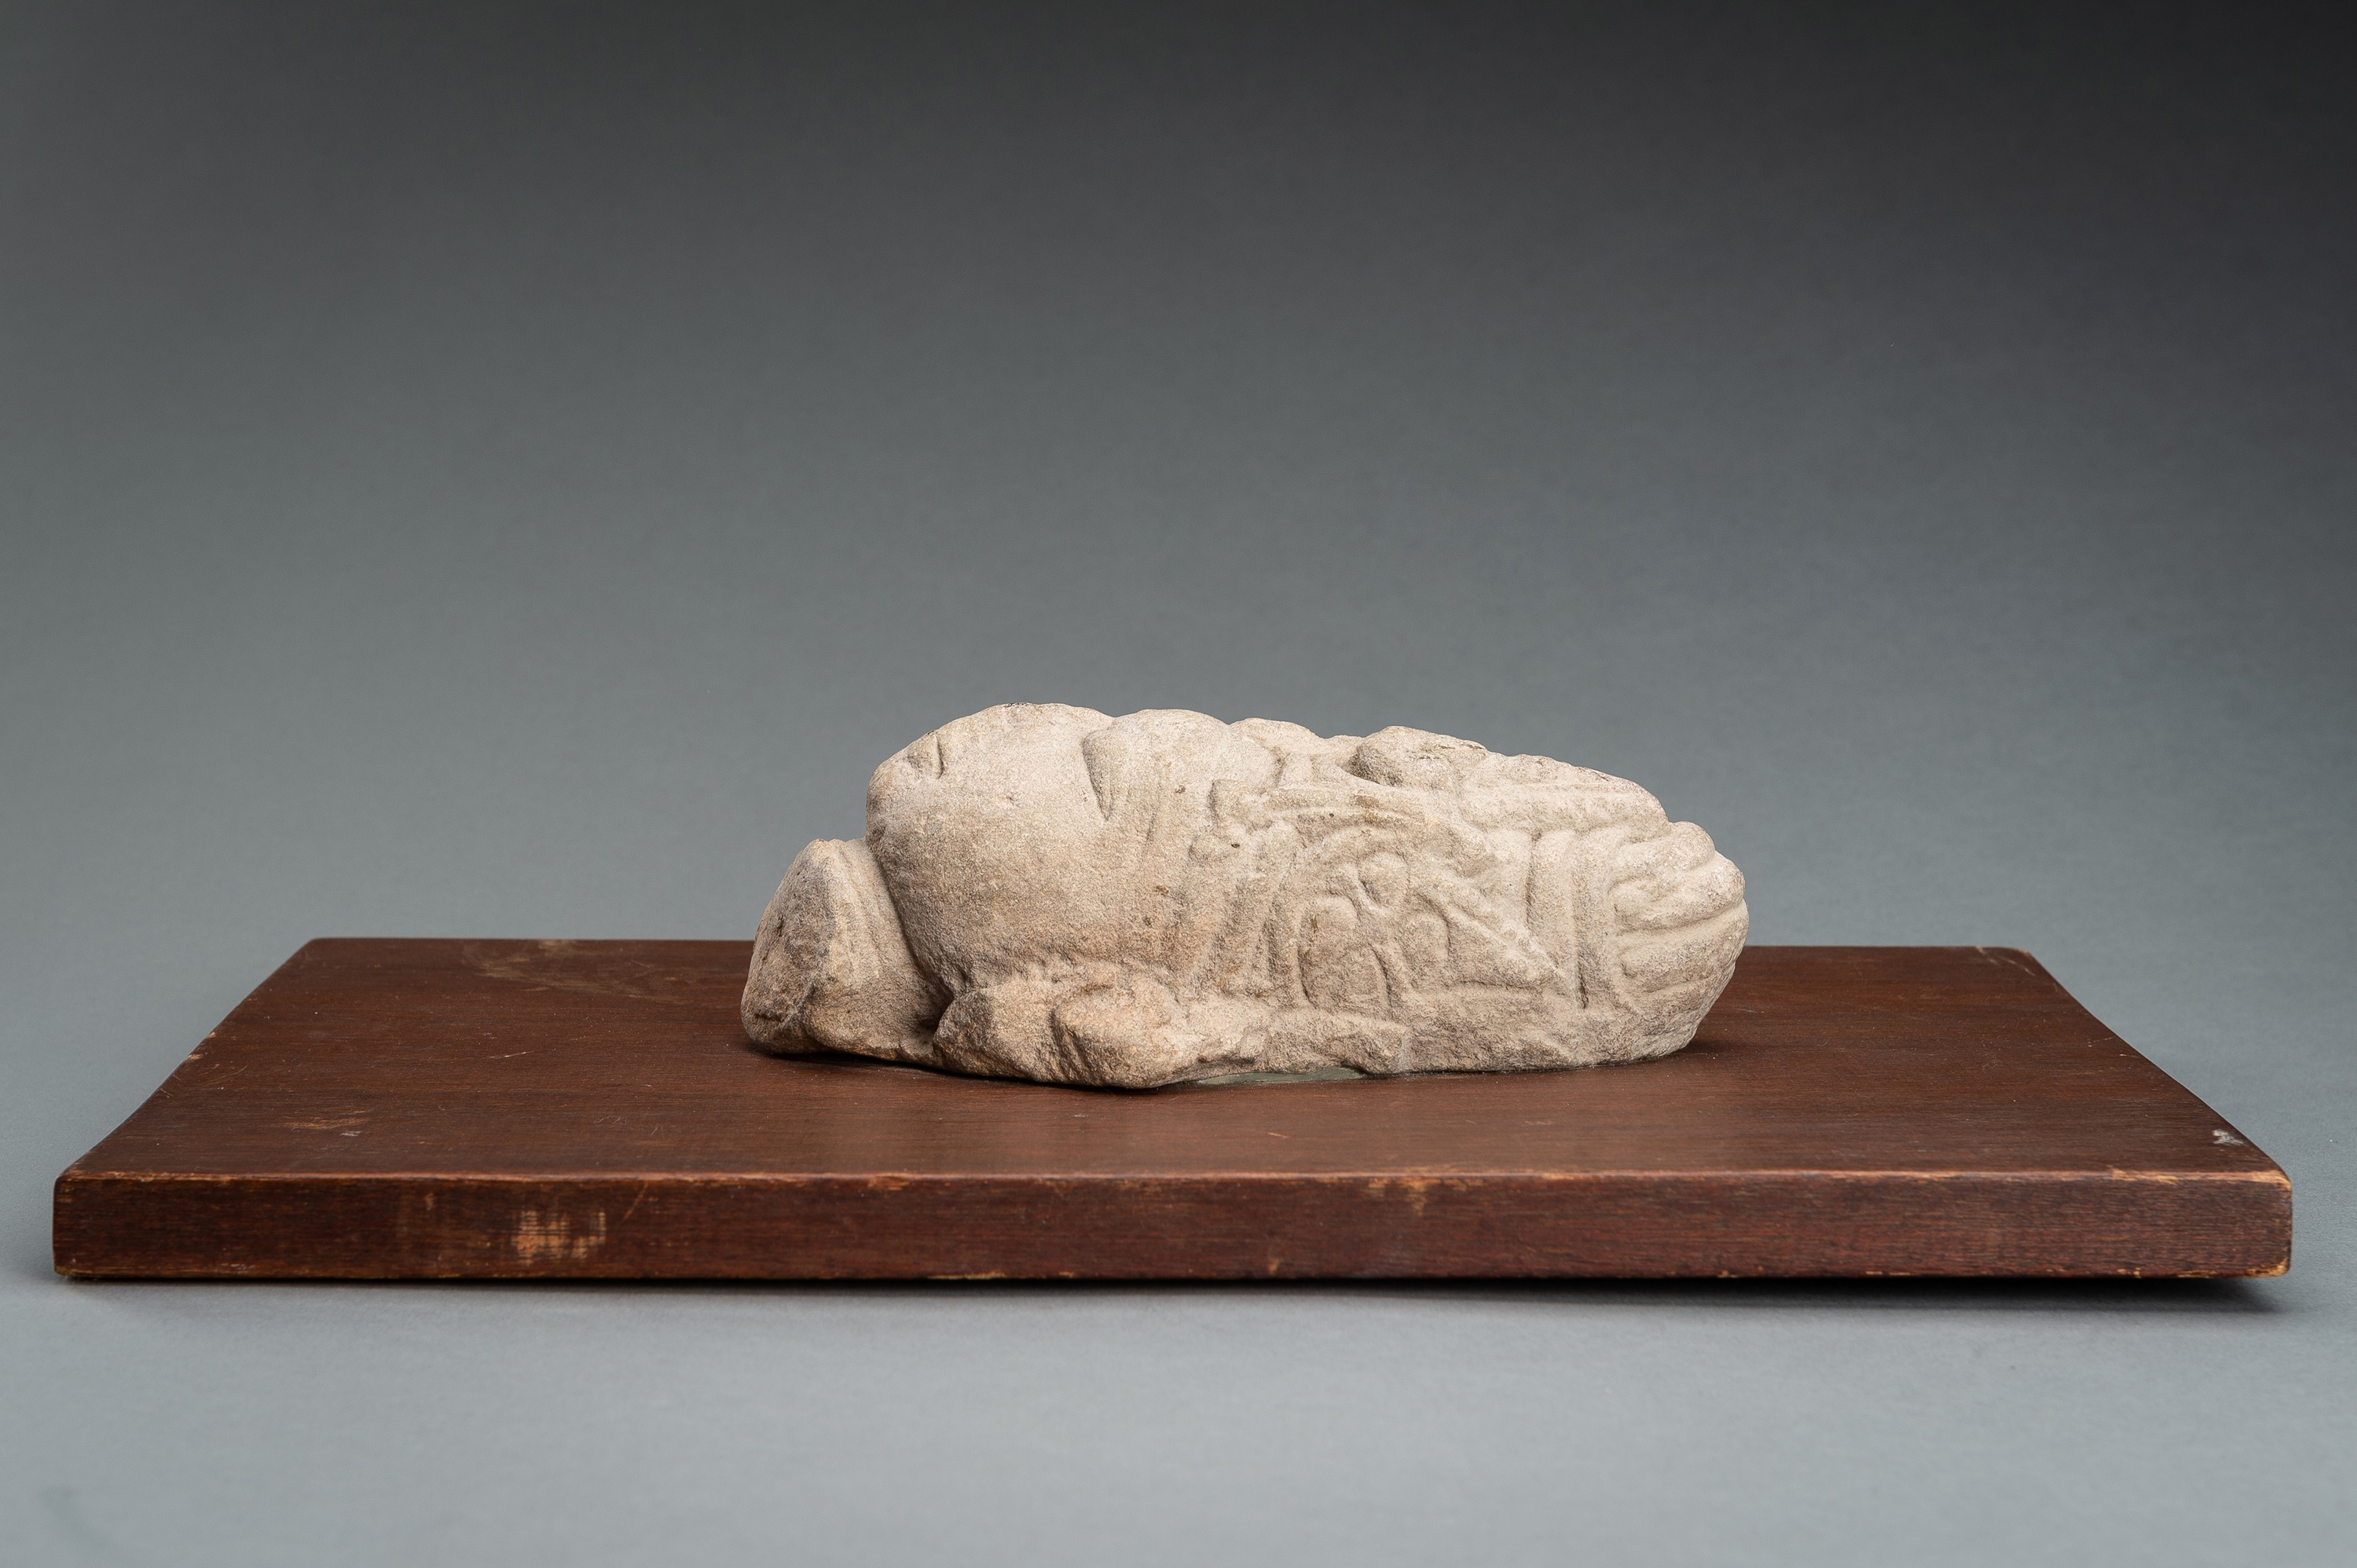 A SANDSTONE HEAD OF VISHNU WITH A MITER CROWN - Image 11 of 14